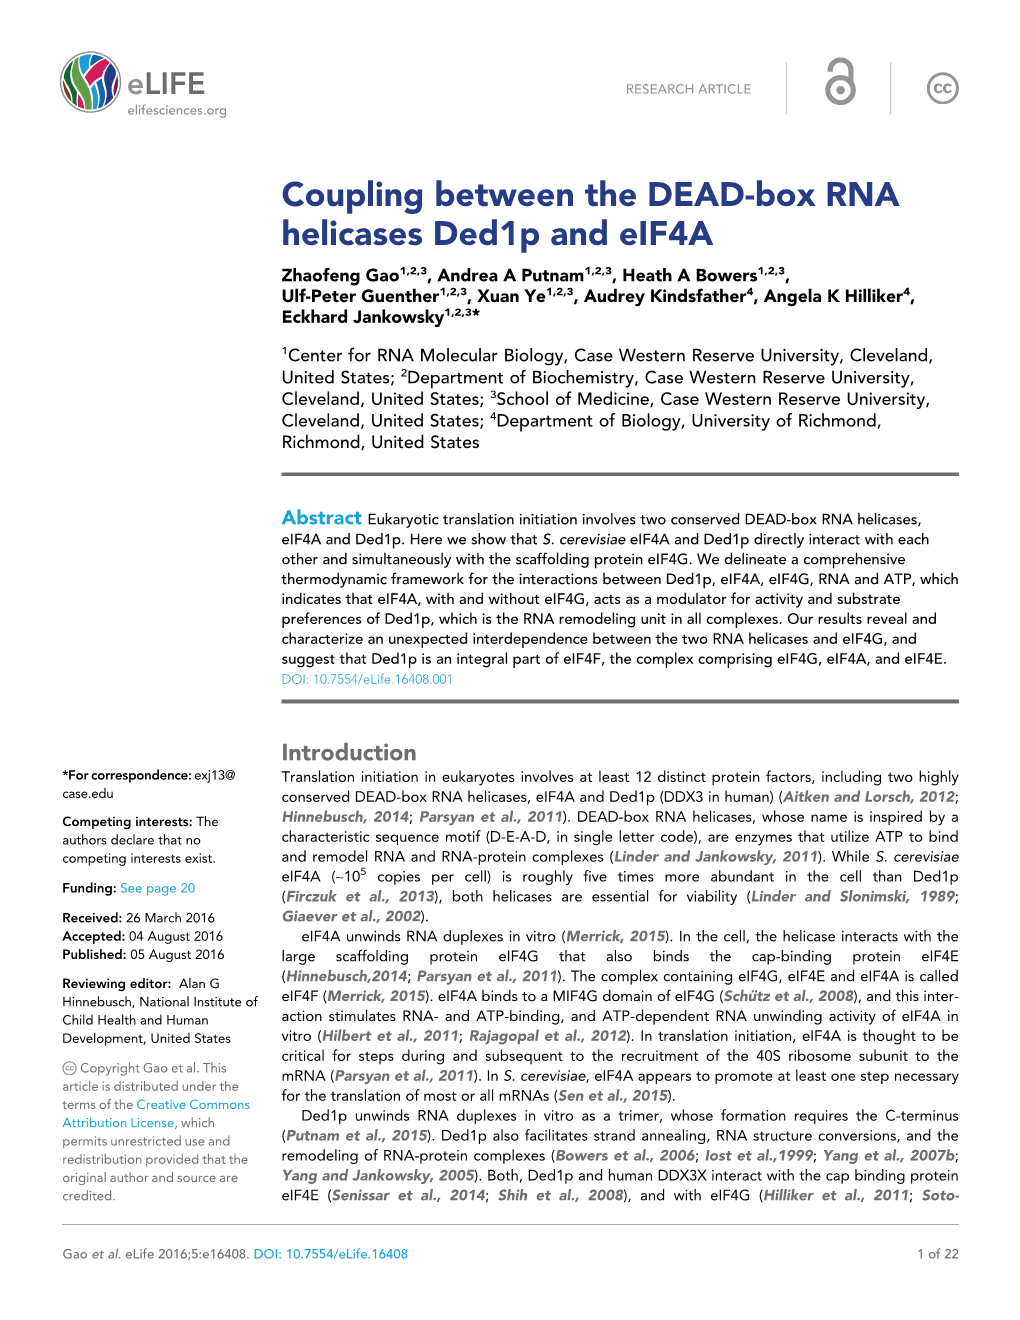 Coupling Between the DEAD-Box RNA Helicases Ded1p and Eif4a